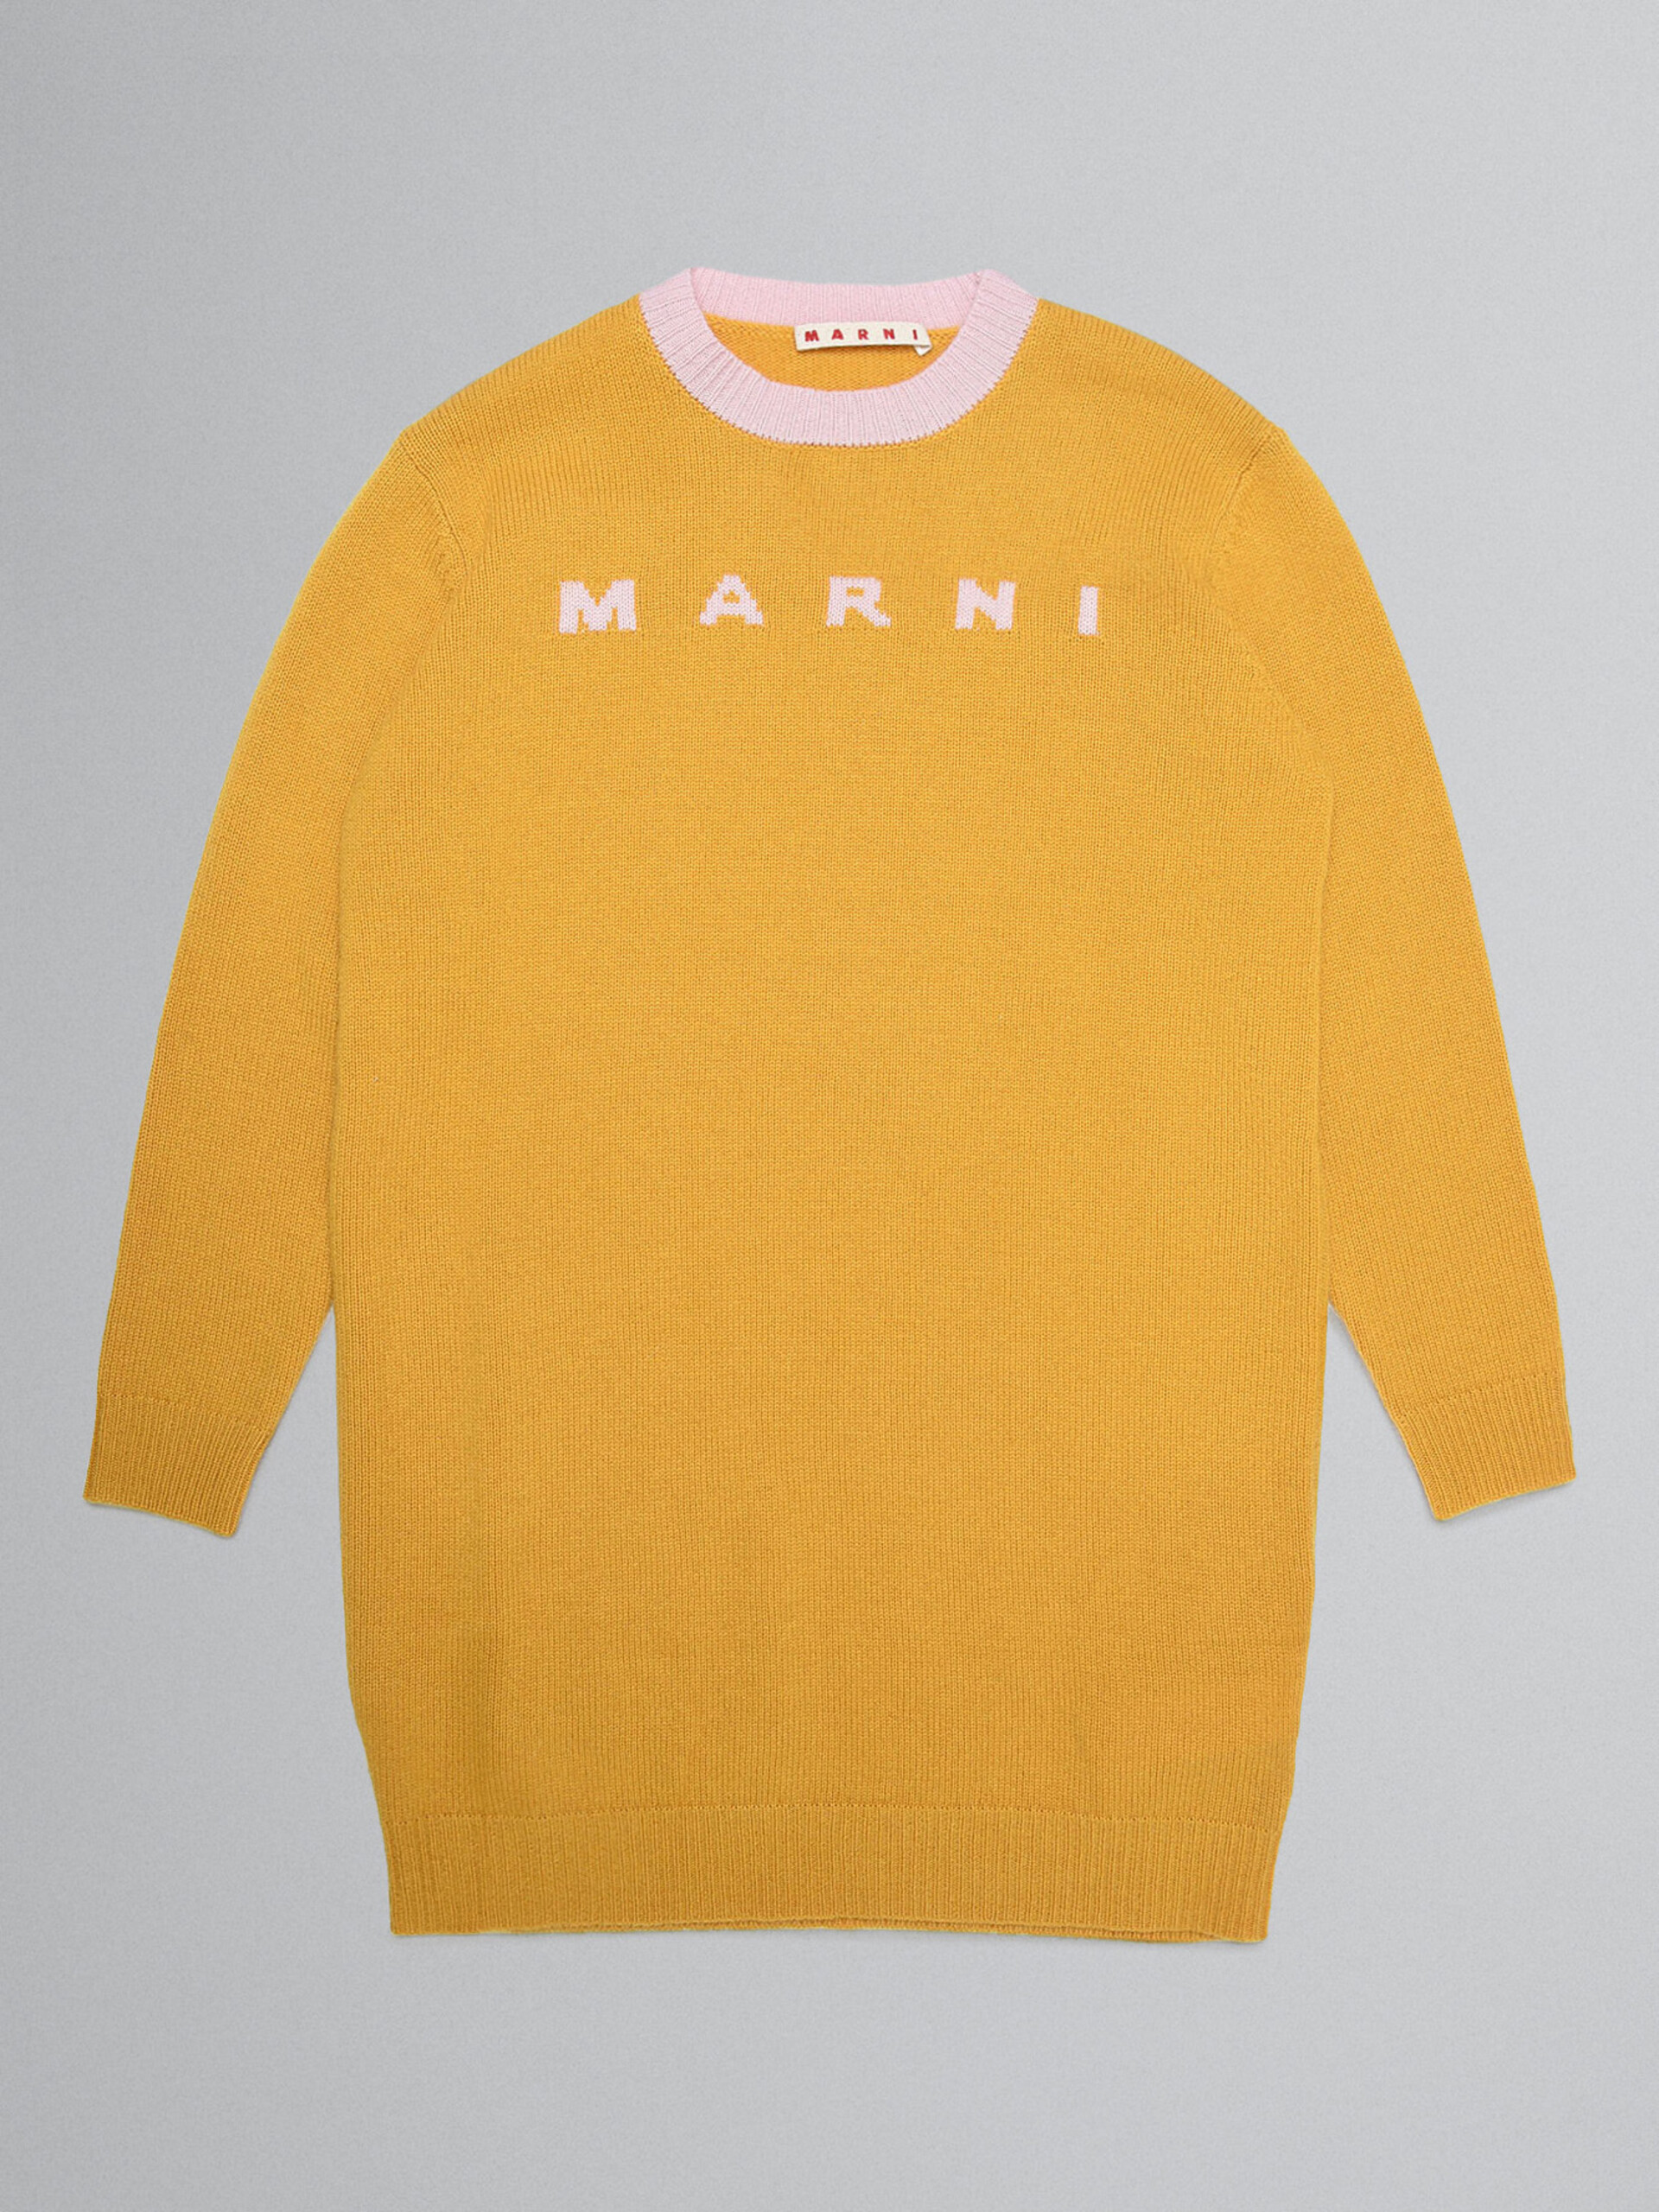 Yellow jumper dress with "Marni" lettering - Dresses - Image 1